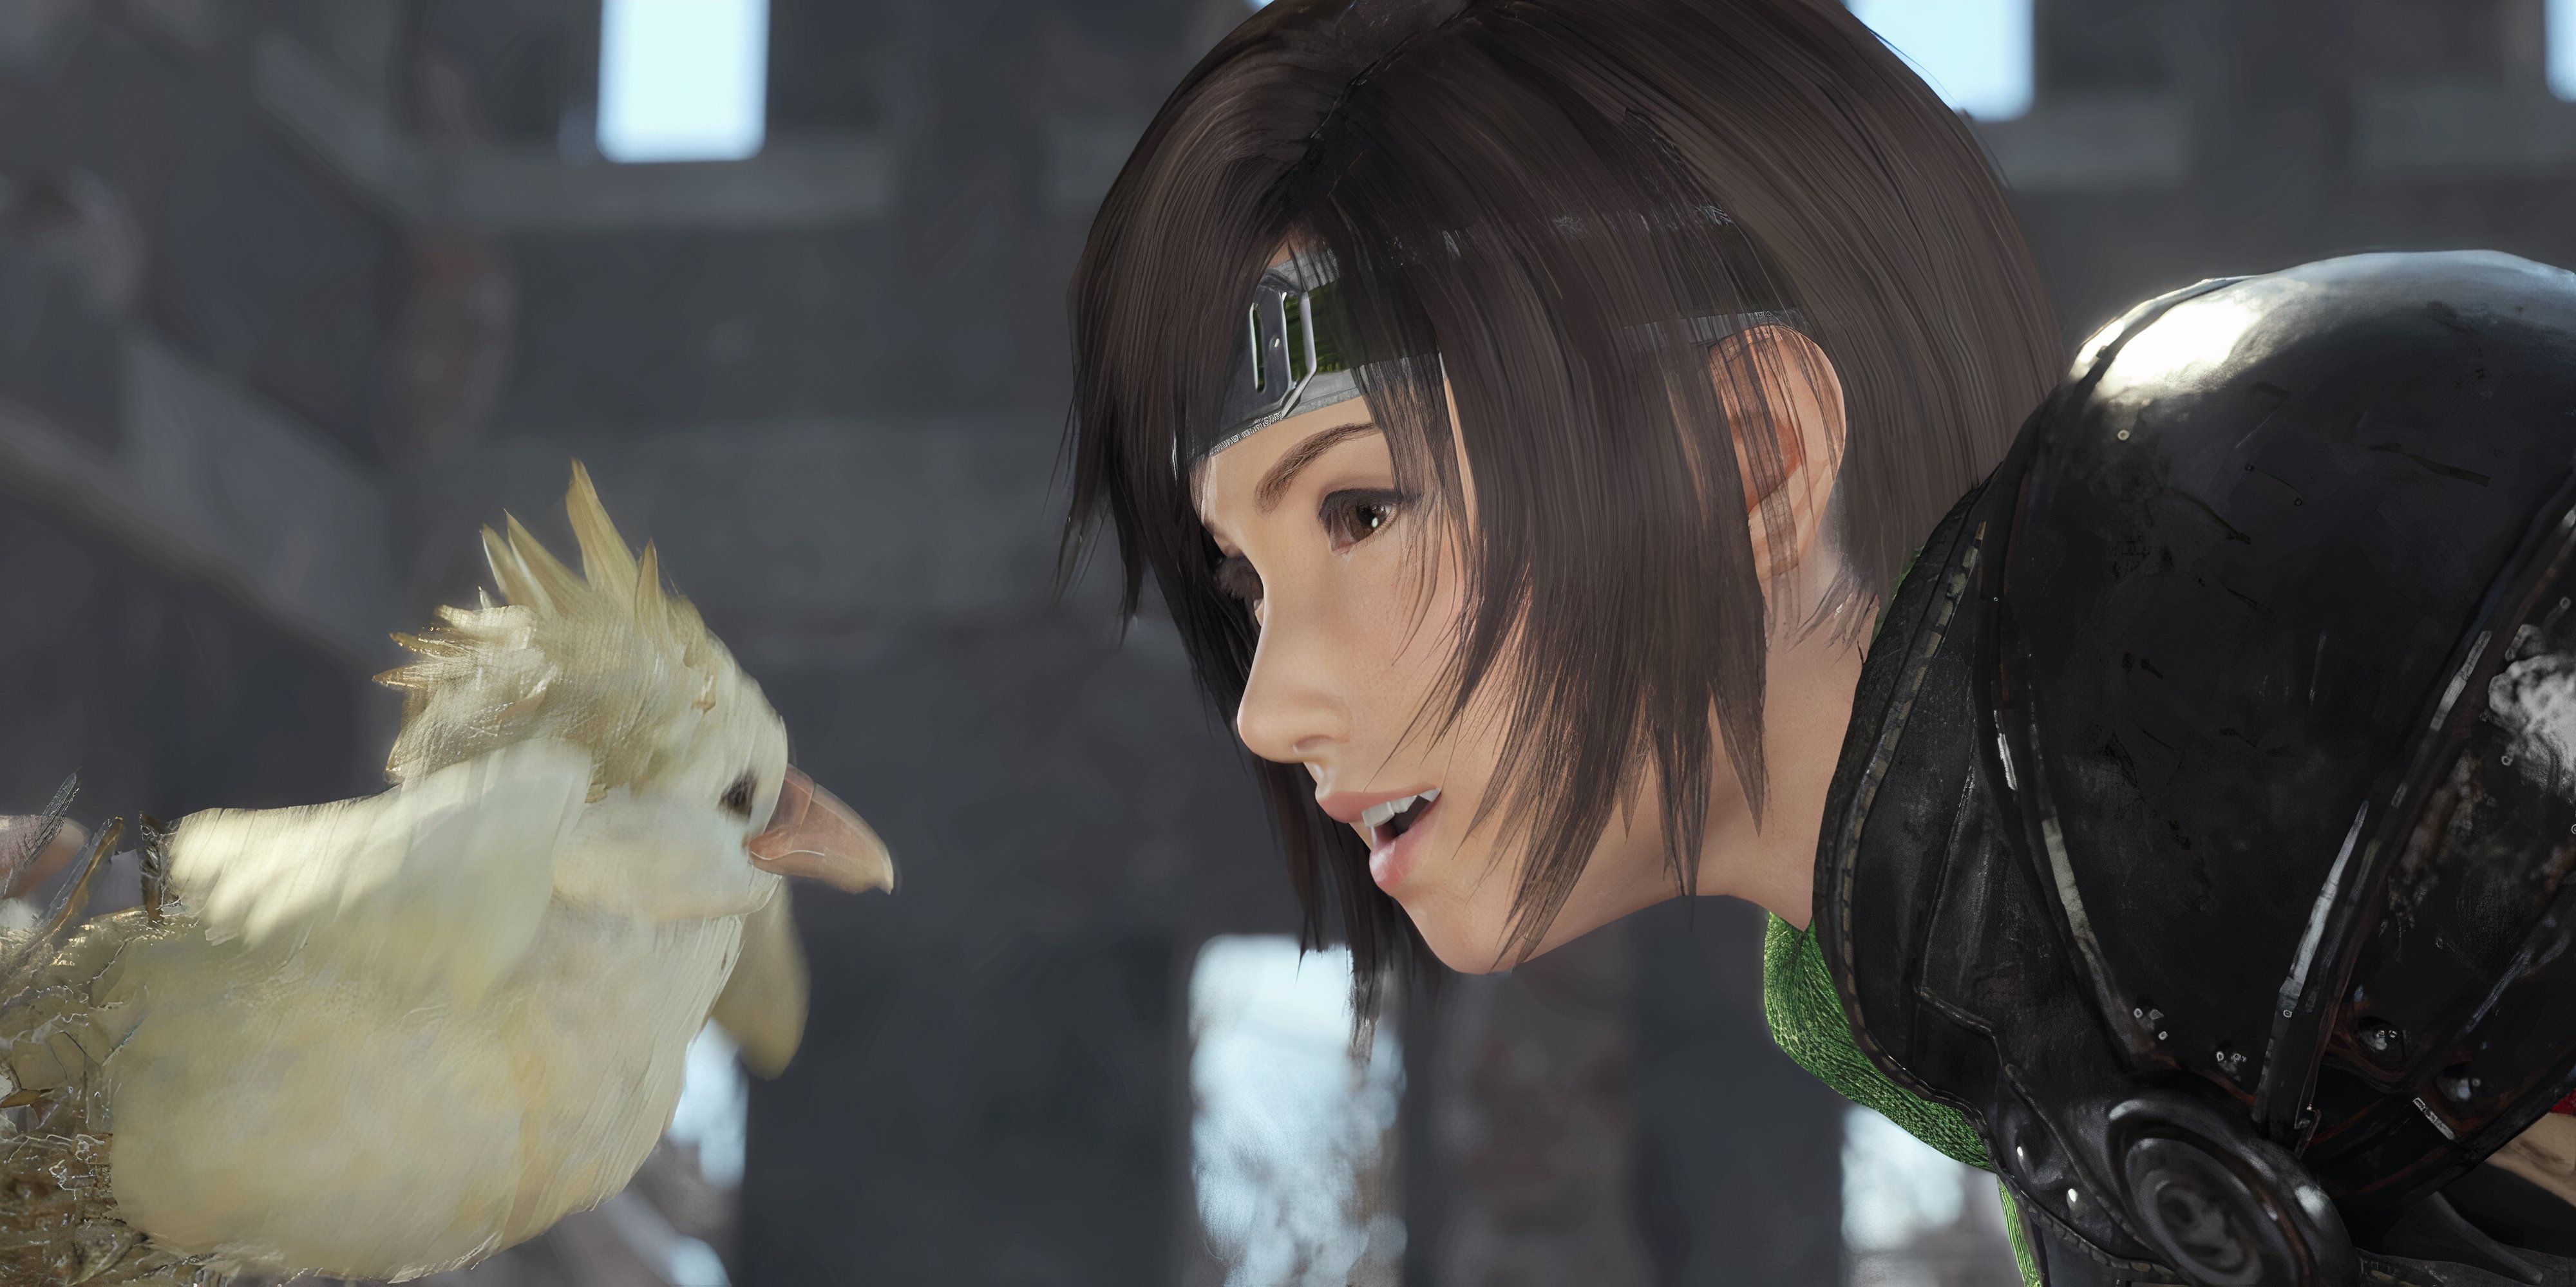 yuffie looking at a baby chocobo in final fantasy 7 rebirth